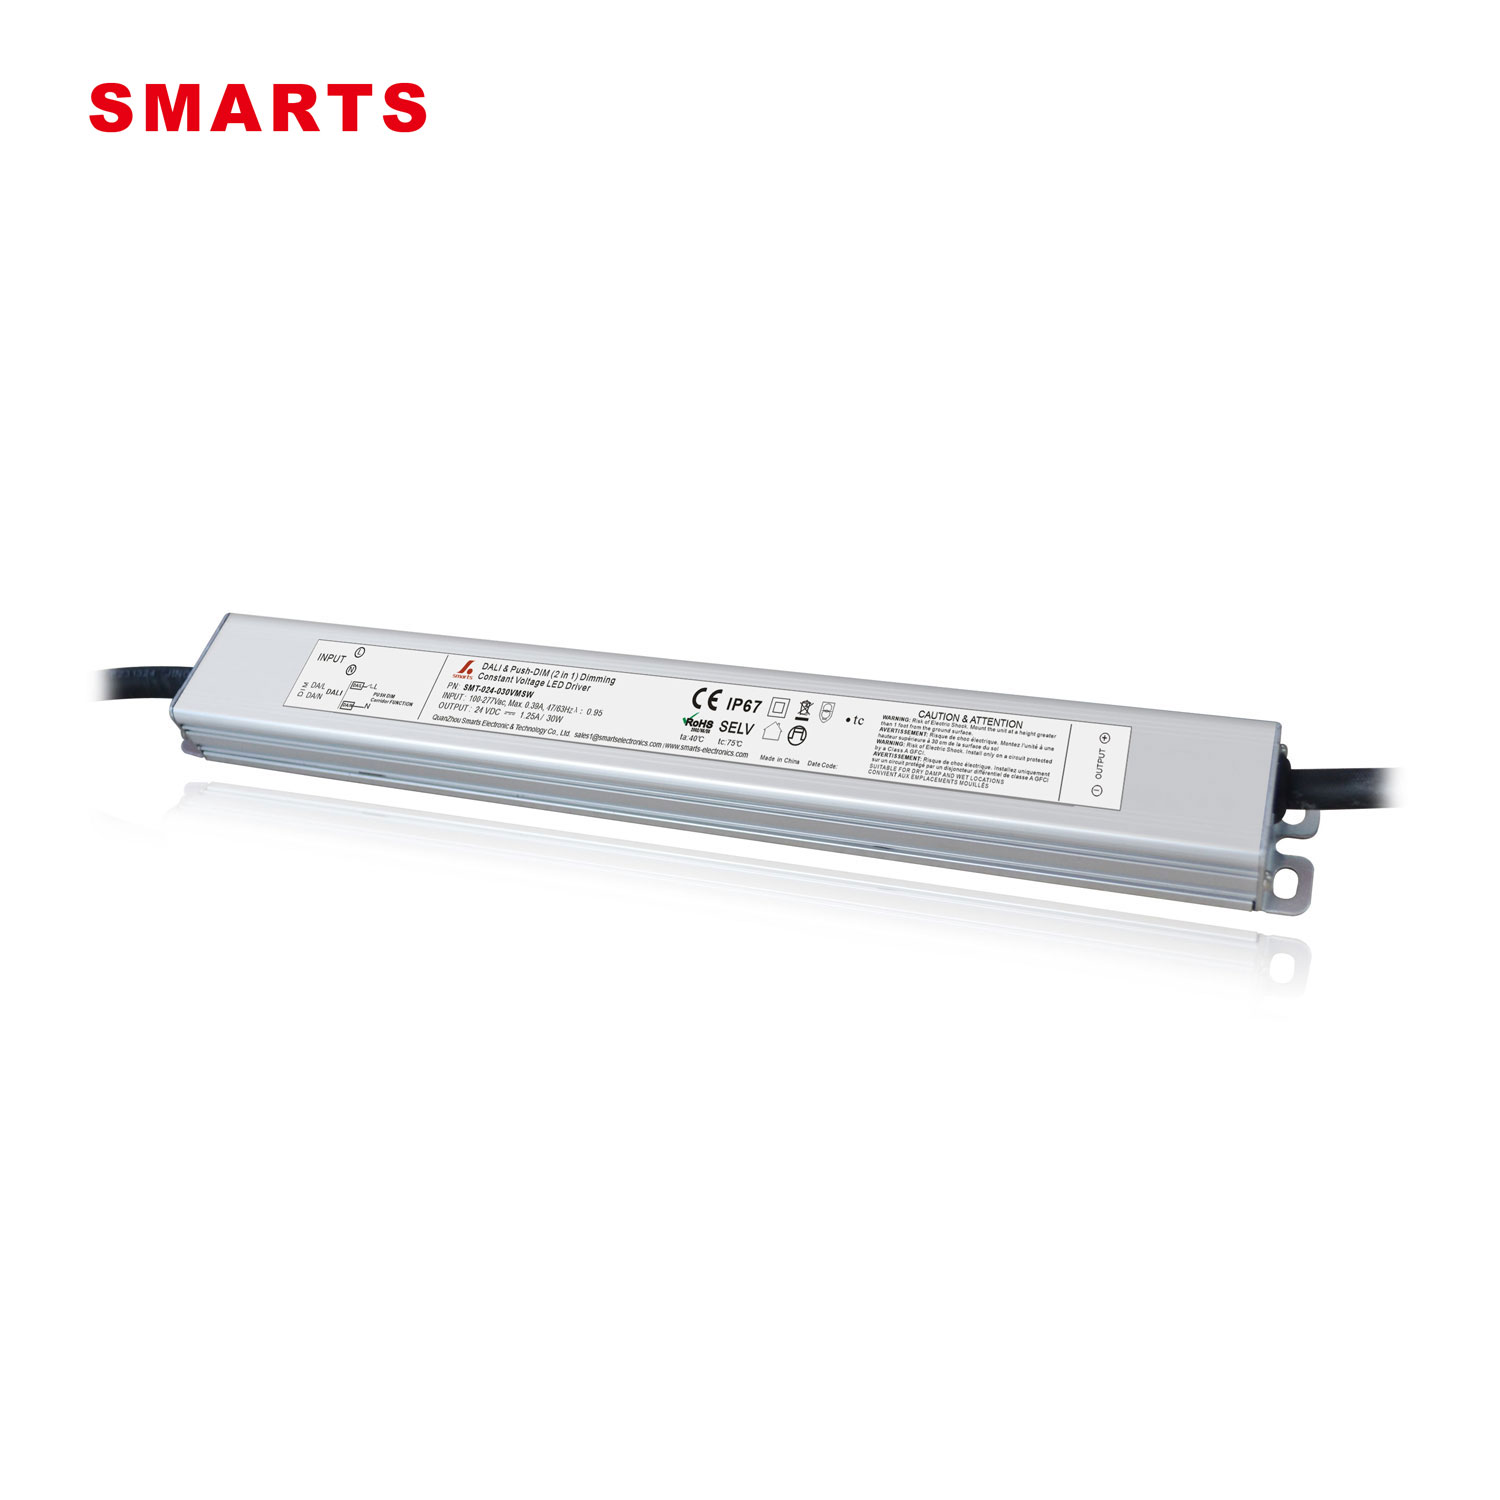 Dali dimmable slim led driver